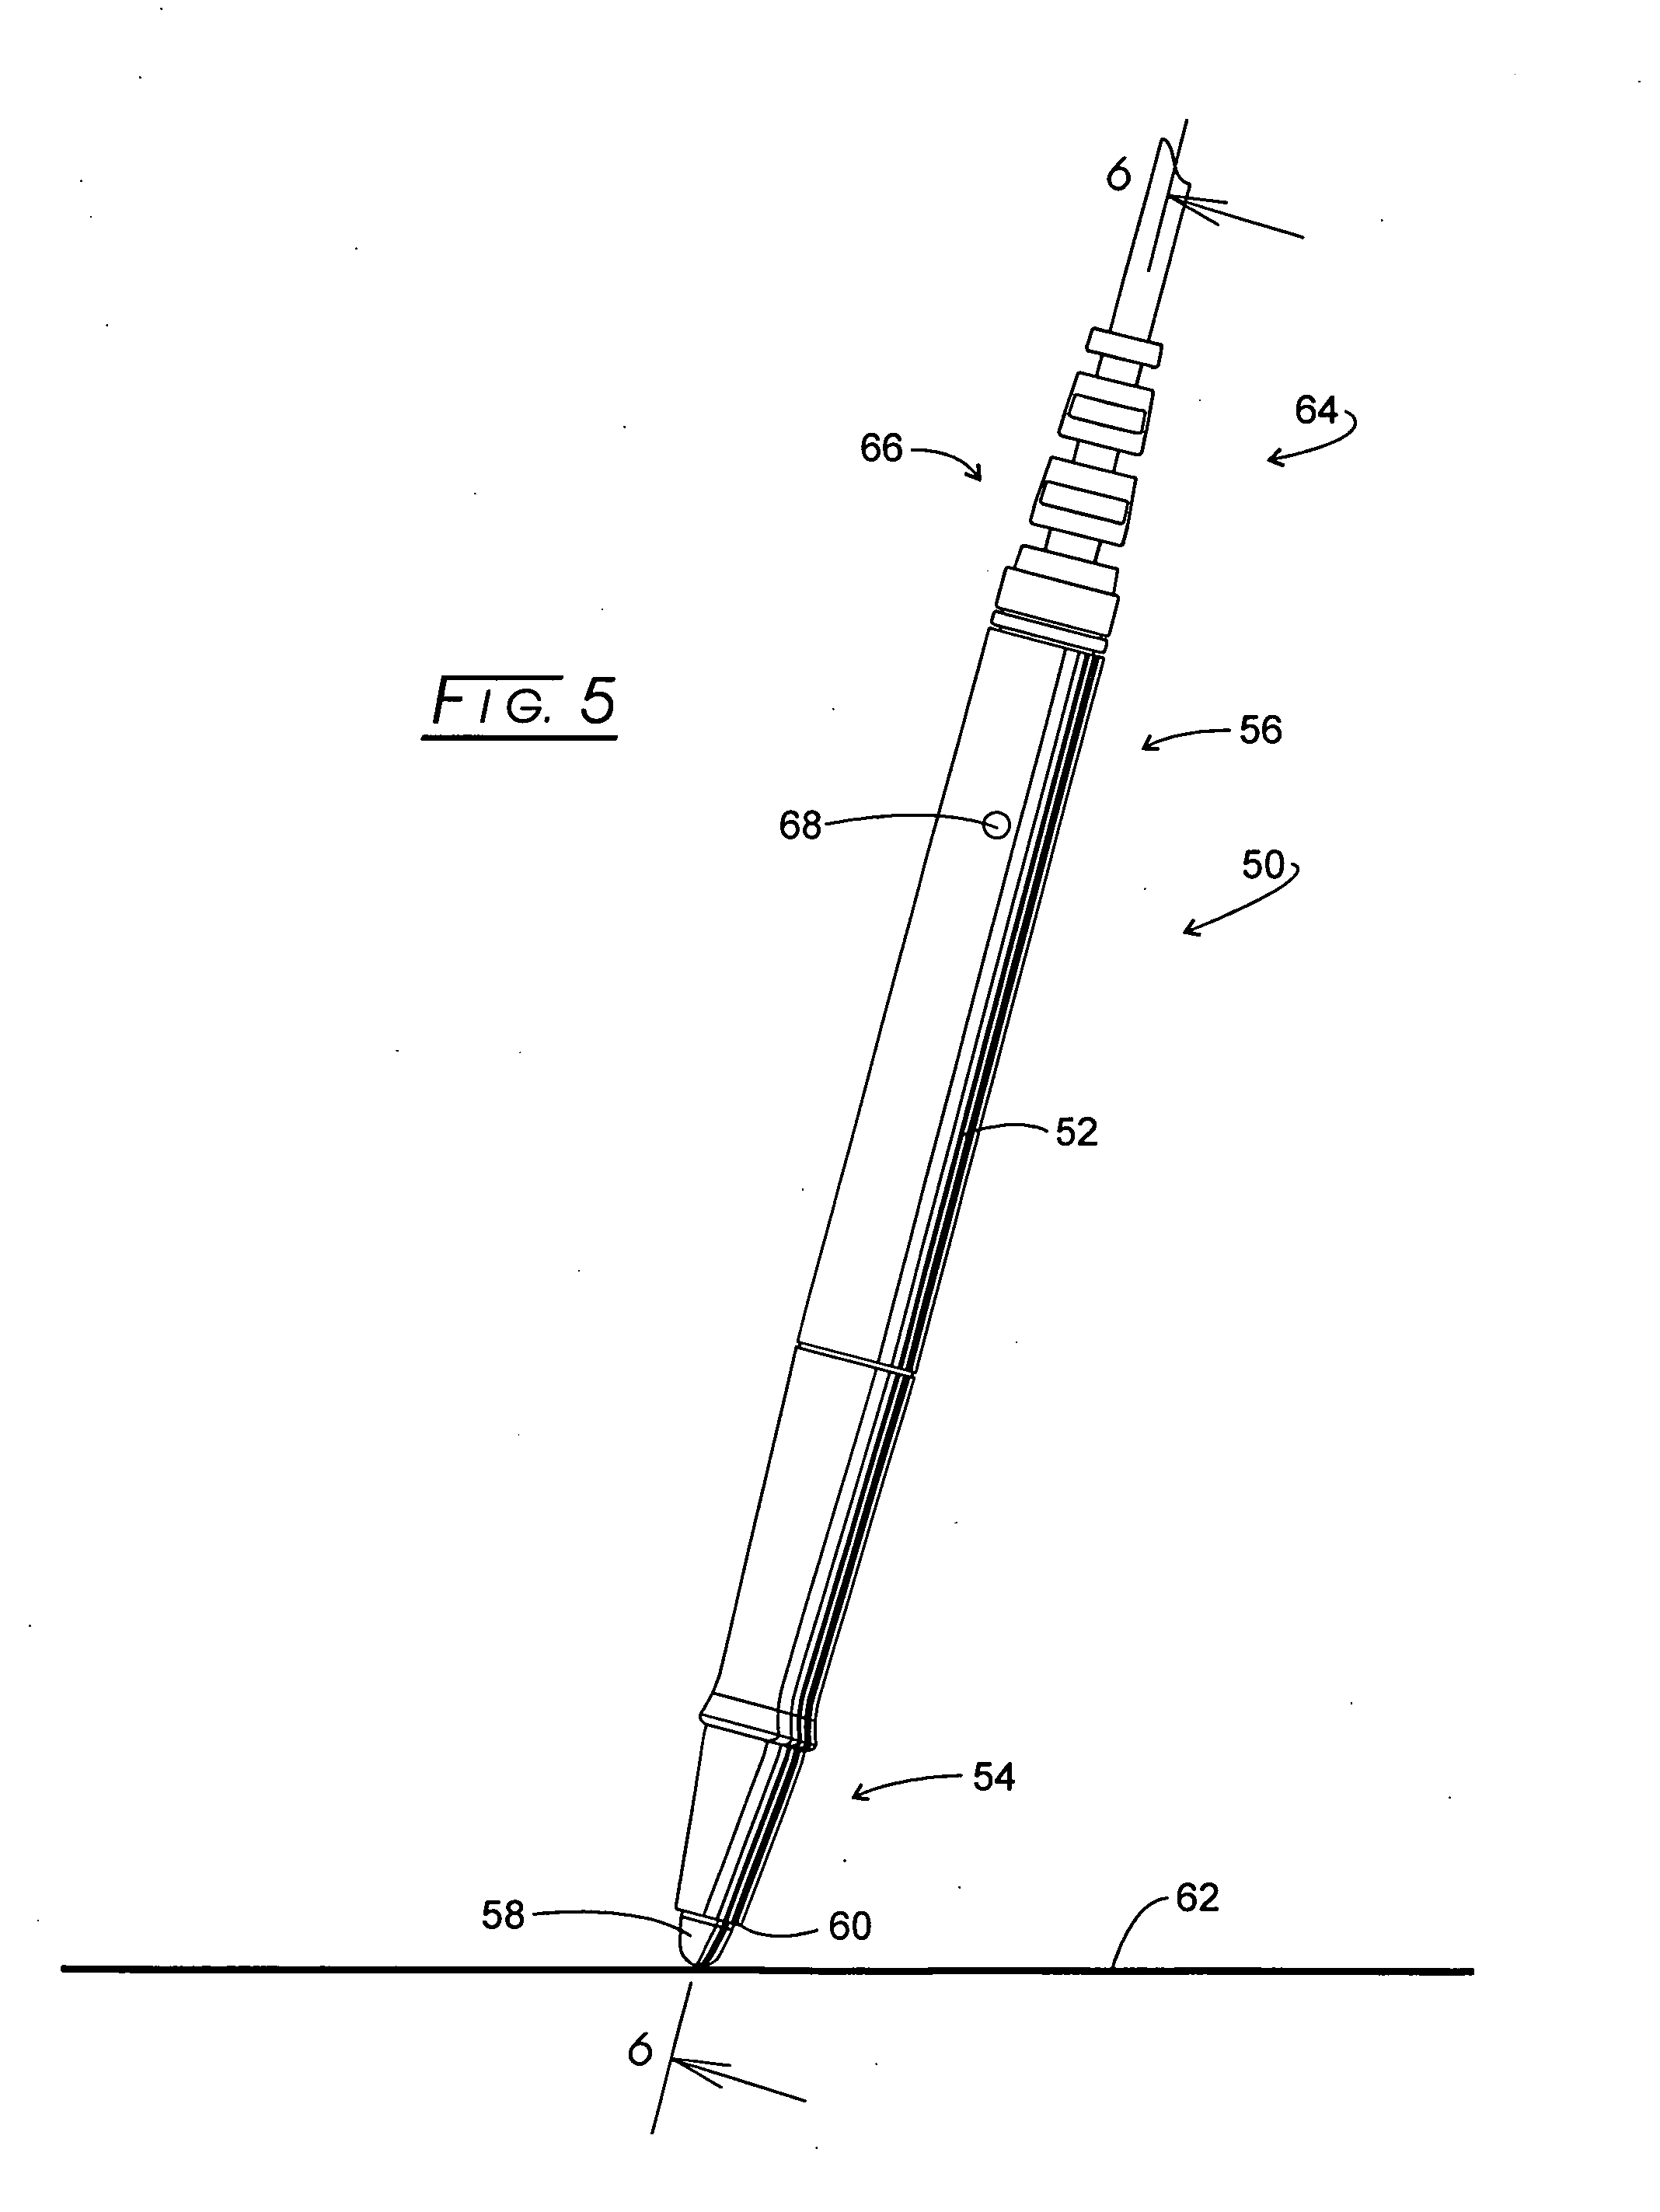 Pen apparatus and method of assembly